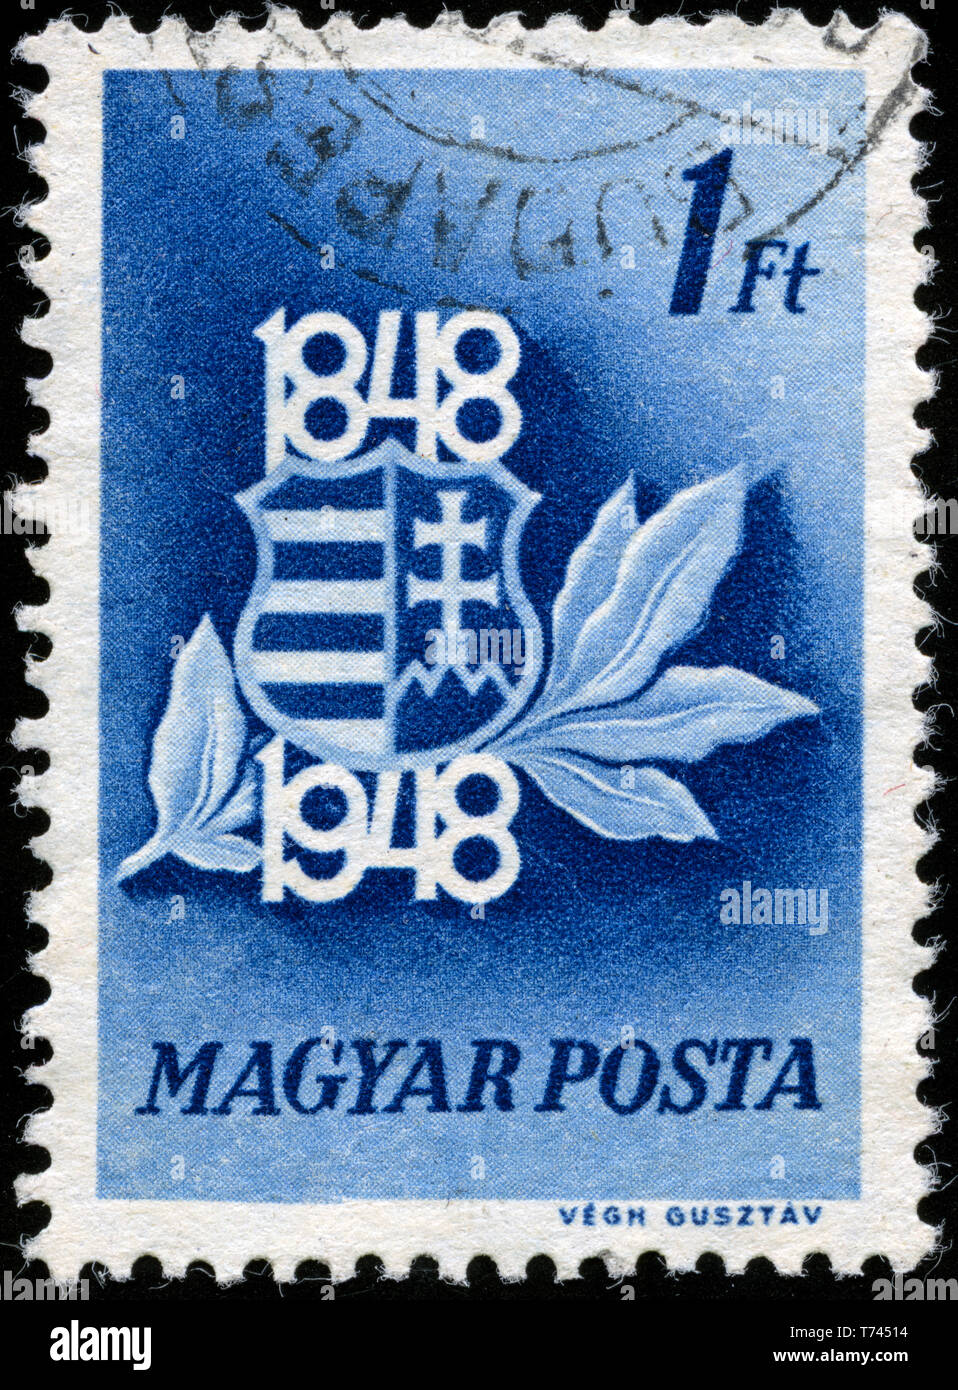 Postage stamp from Hungary in the Cent. of 1848-49 revolution and war of independence series issued in 1948 Stock Photo